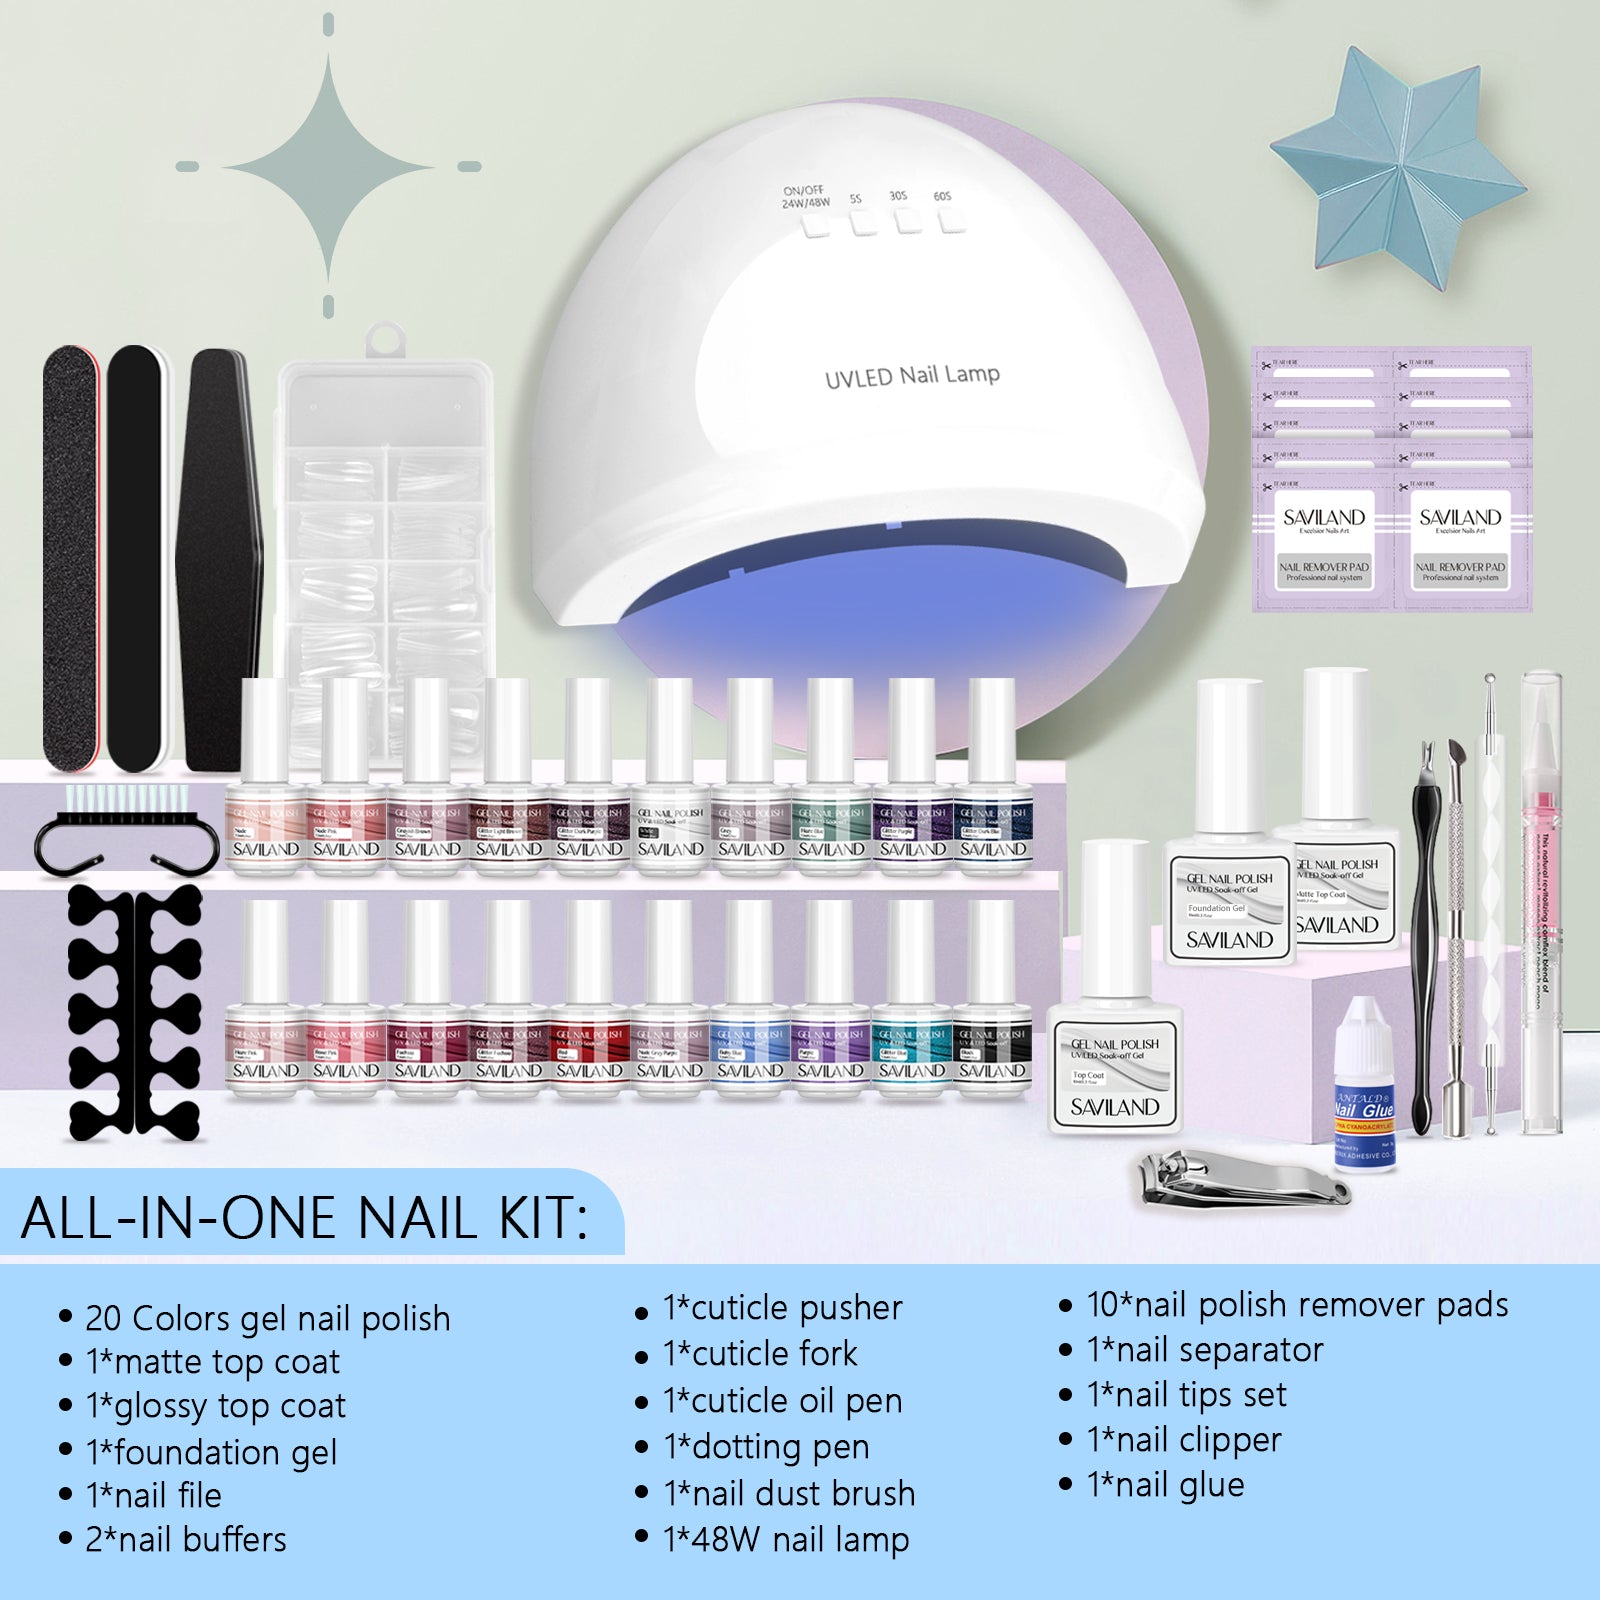 [US ONLY]46PCS All-In-One Gel Nail Polish With Lamp Nail Kit for Beginners - 20 Colors